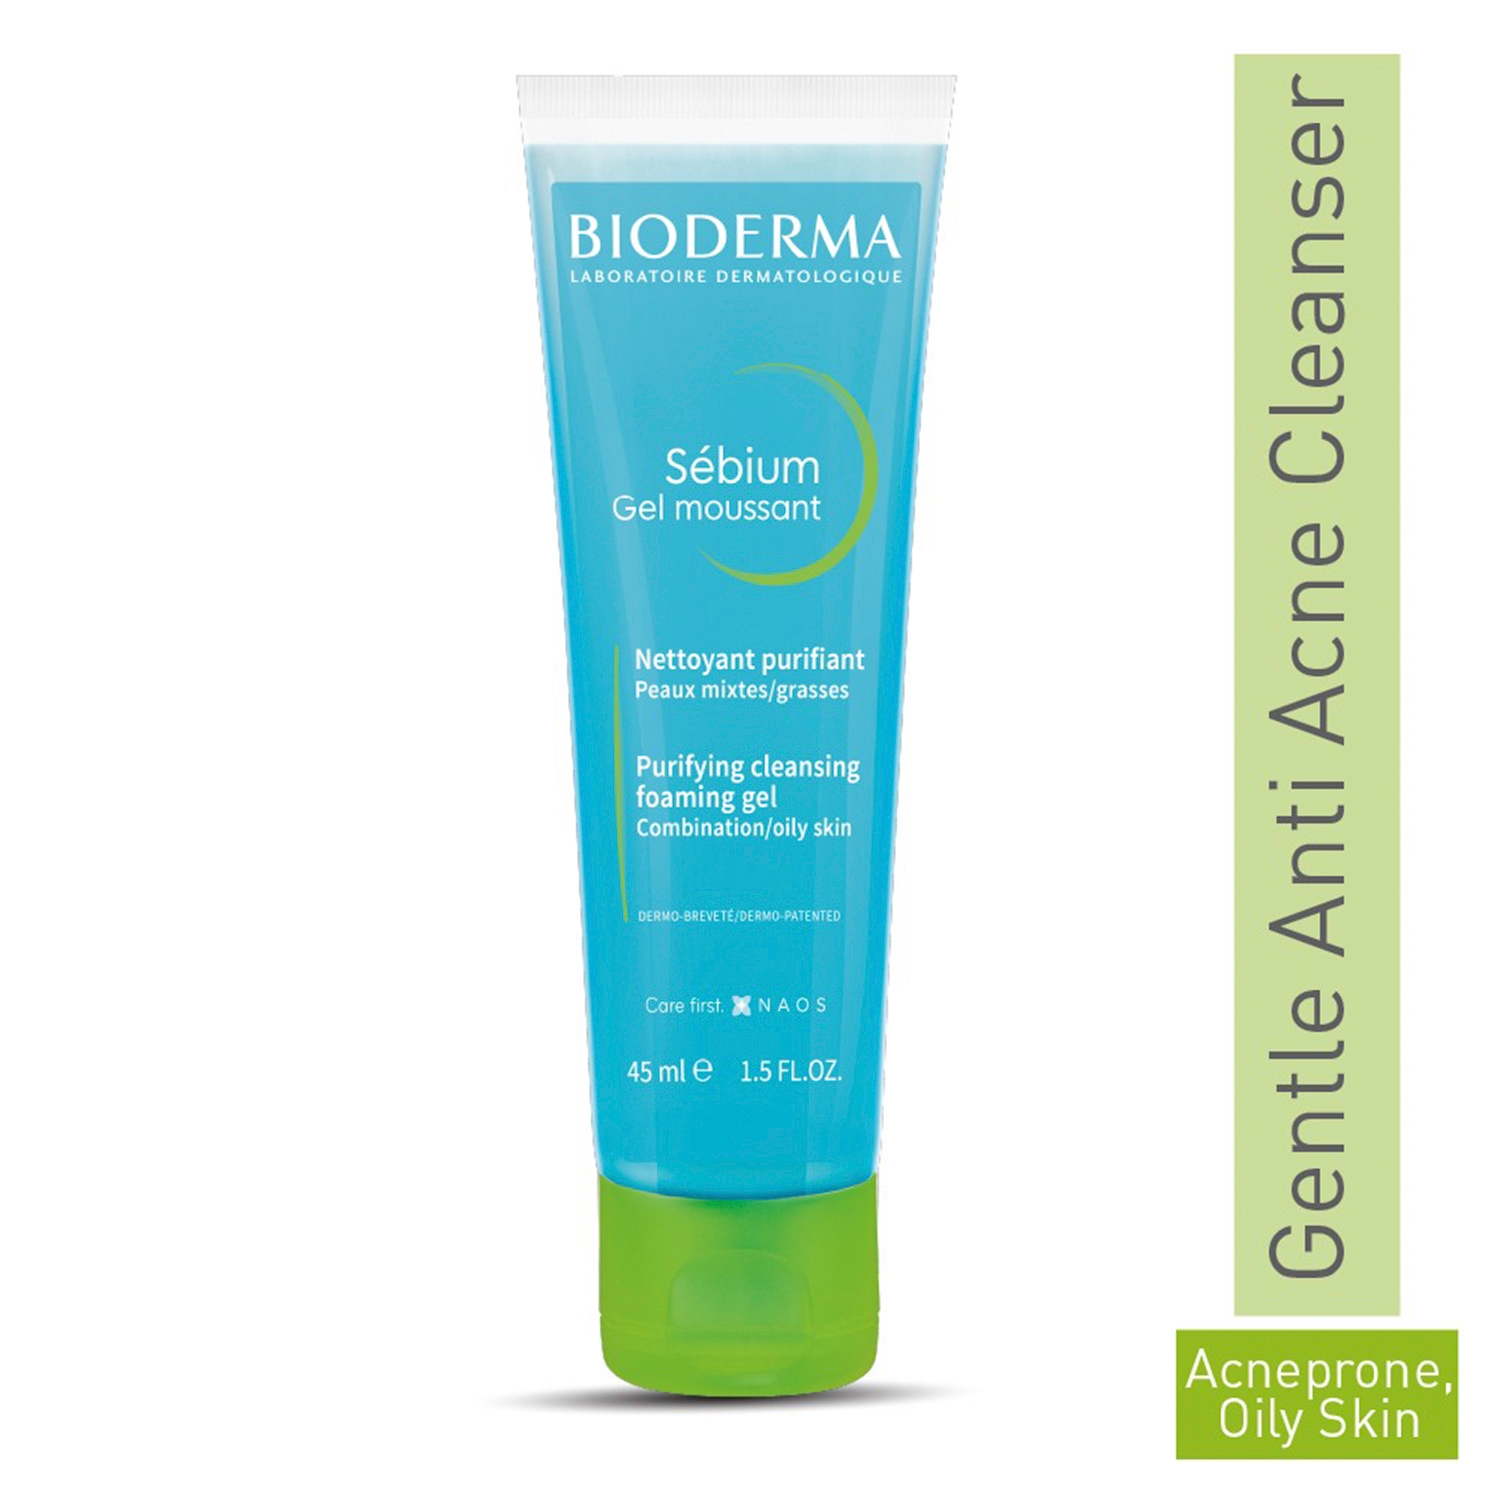 Bioderma | Bioderma Sebium Face And Body Wash Moussant Purifying Cleansing Gel (45ml)